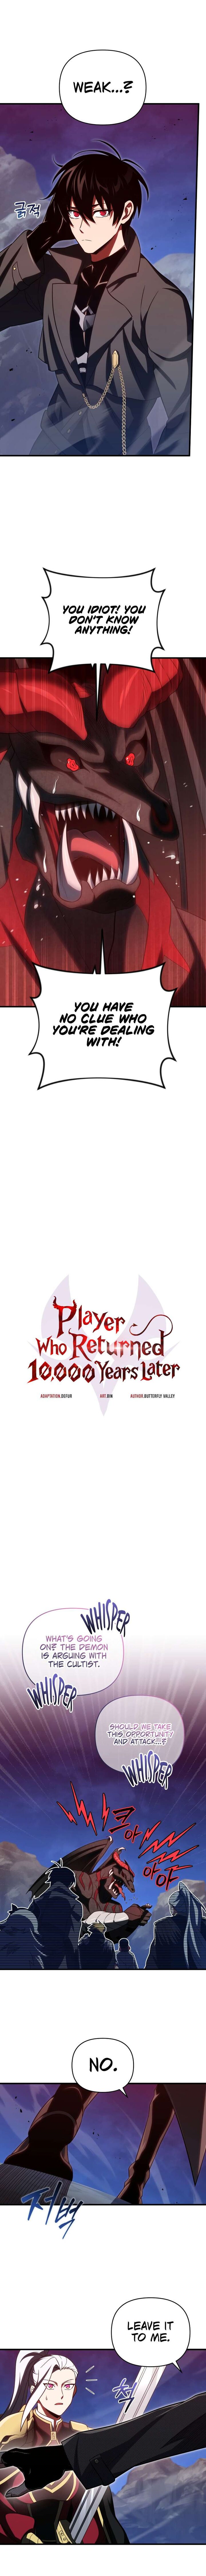 Player Who Returned 10000 Years Later 69 3